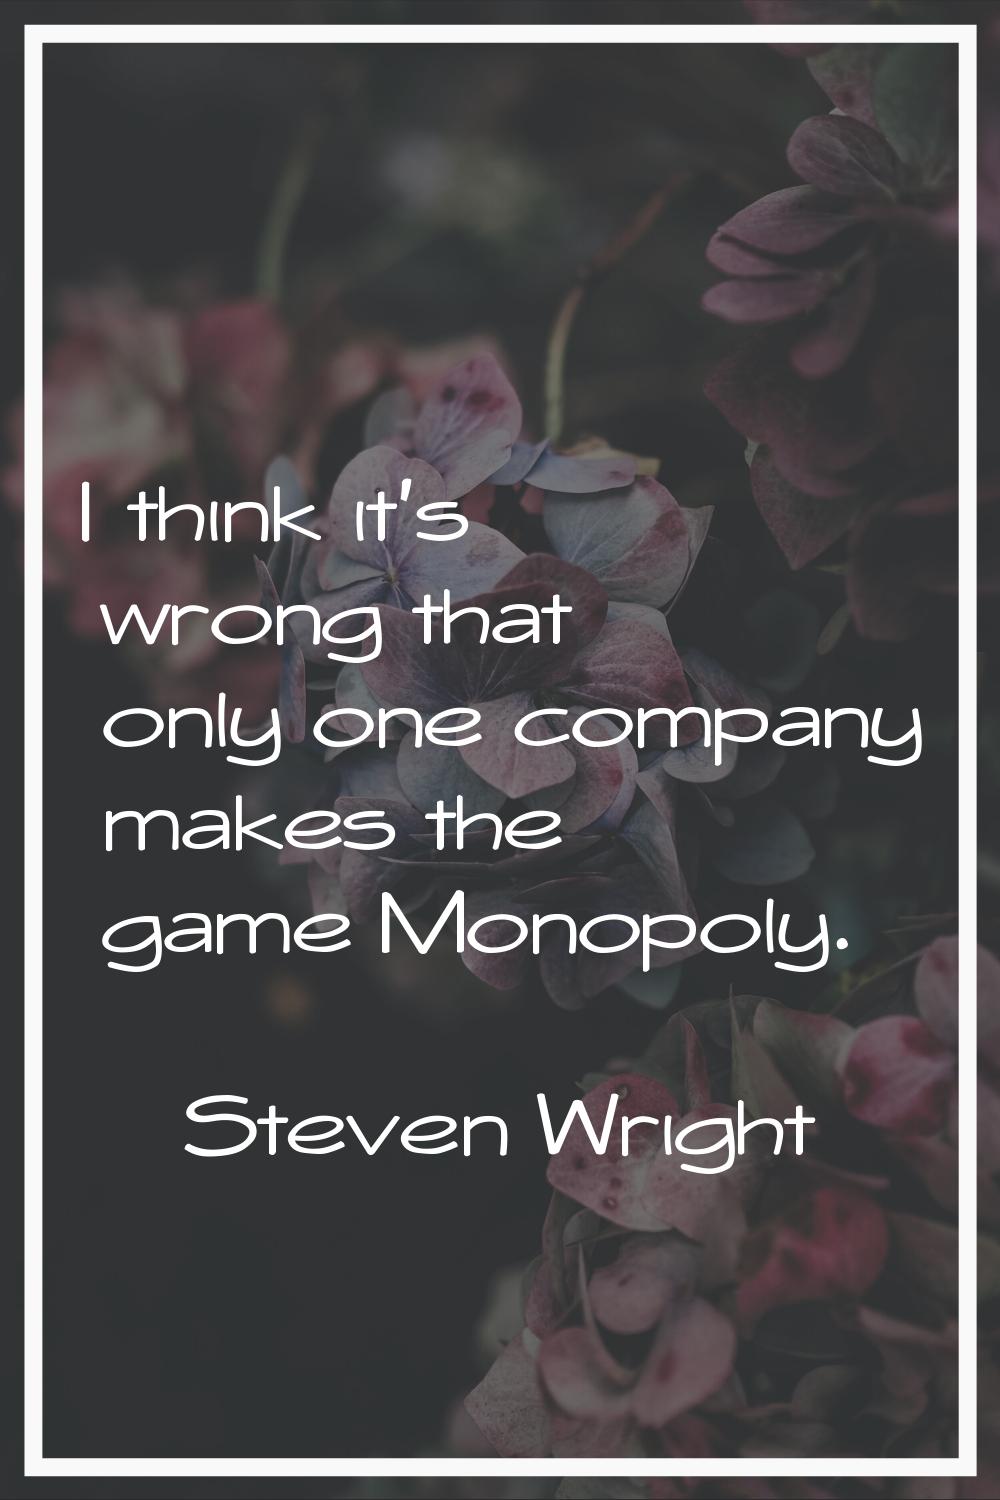 I think it's wrong that only one company makes the game Monopoly.